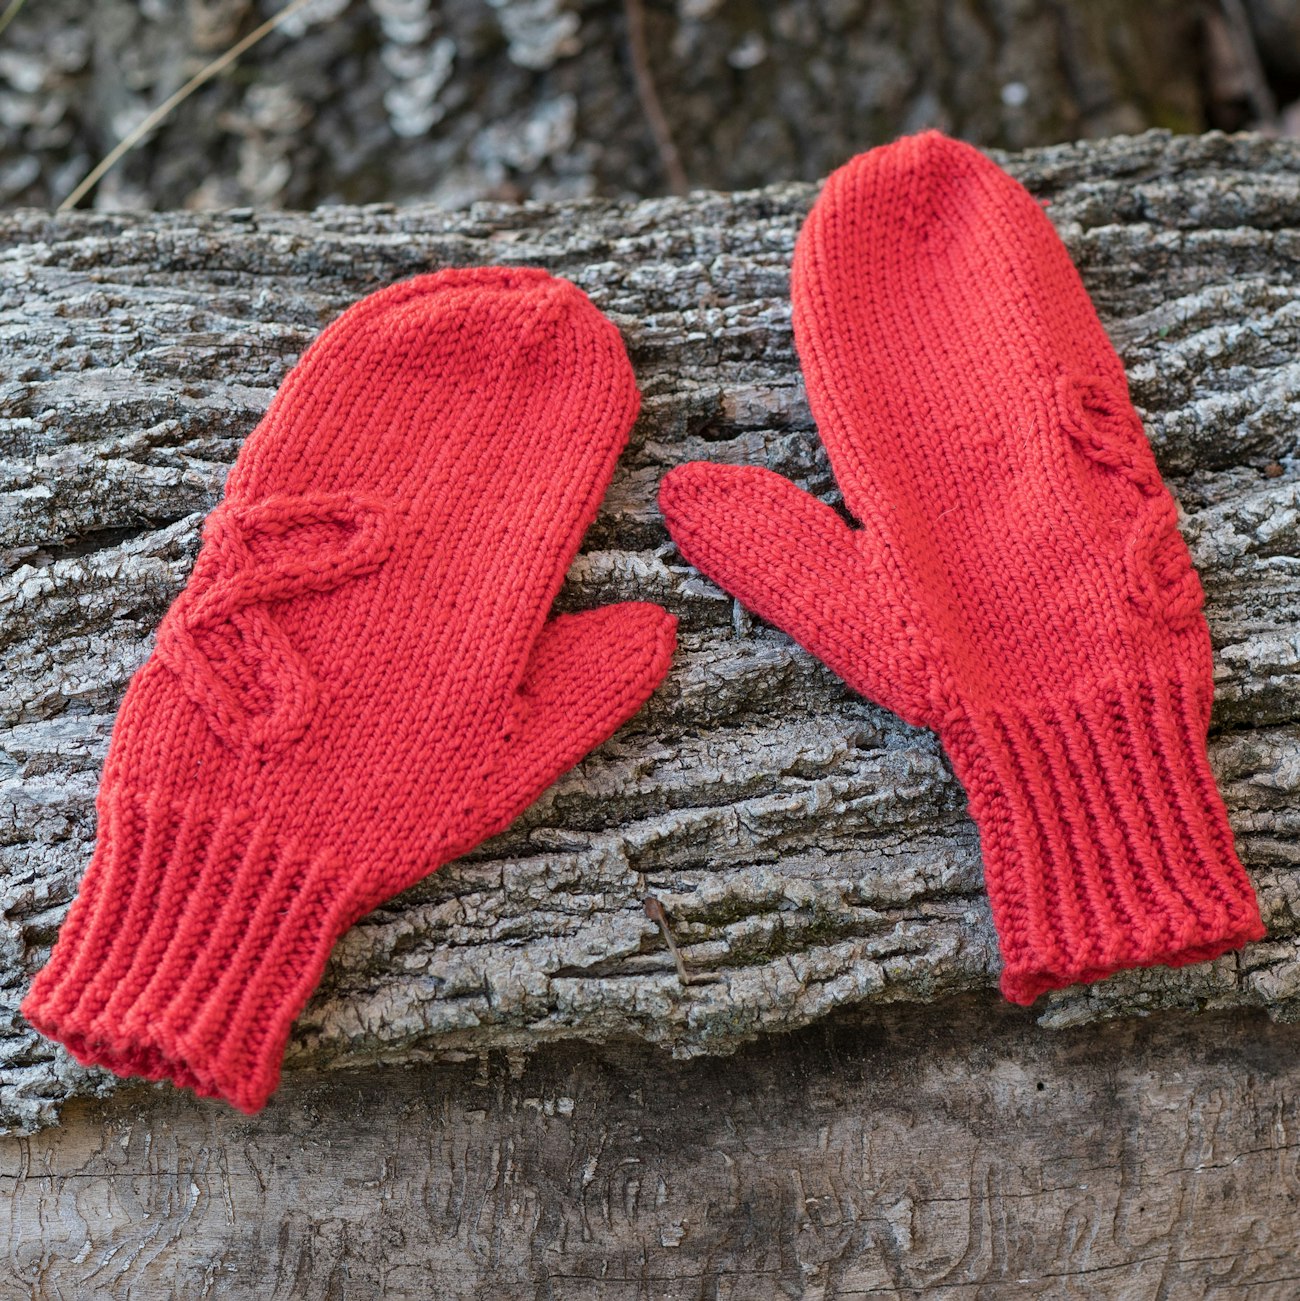 Two red mittens on a log